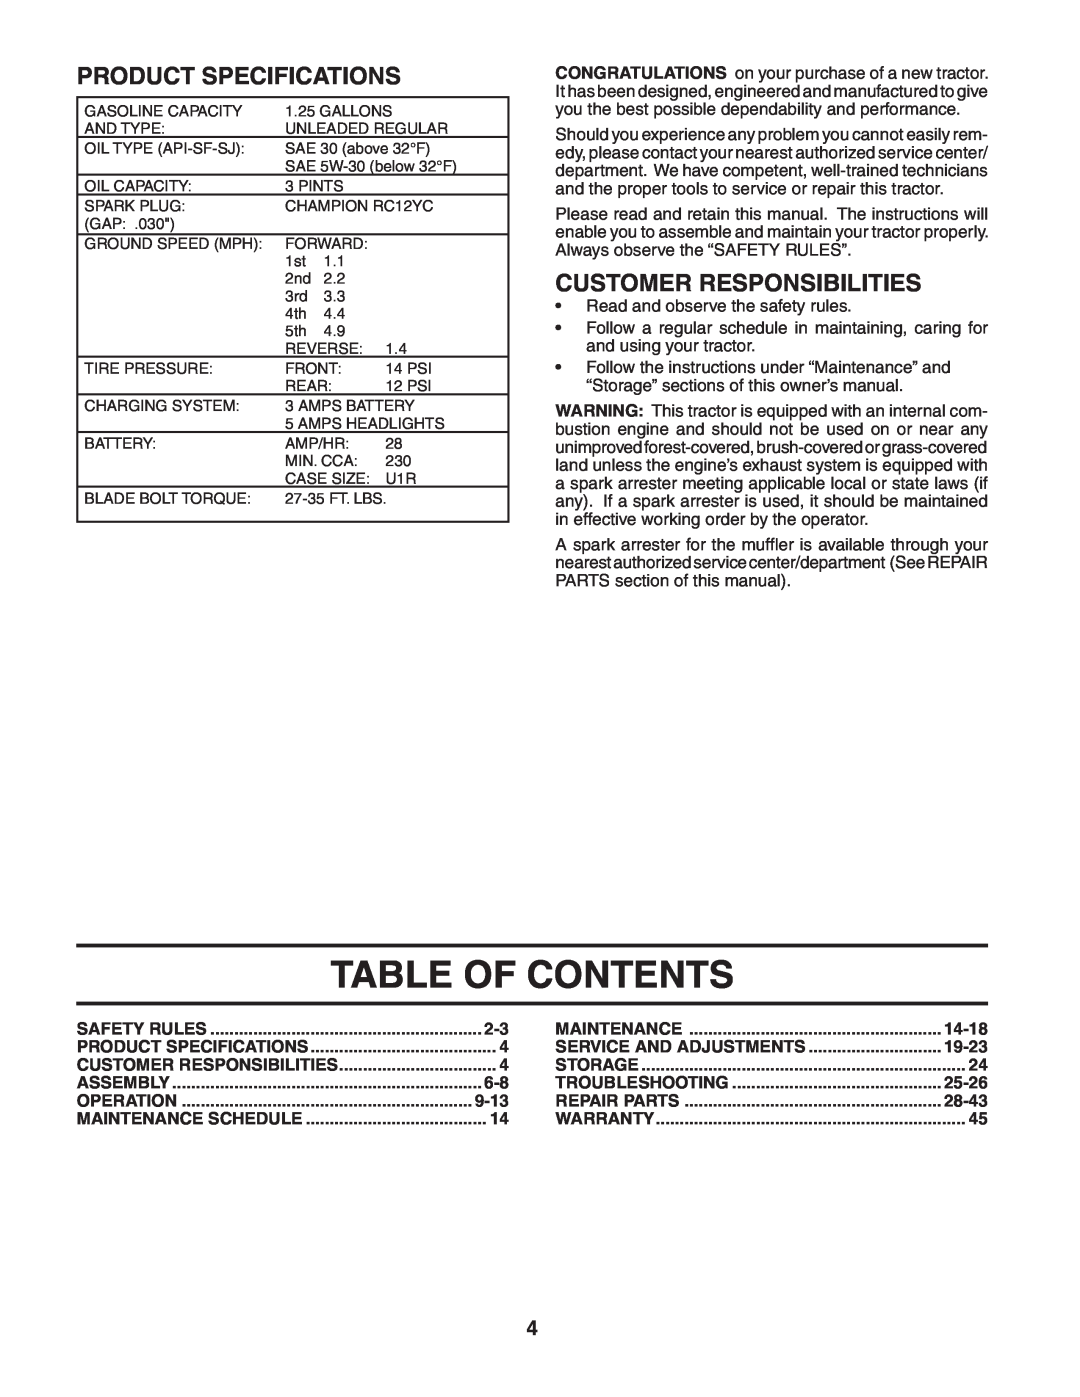 Poulan PO1538C manual Table Of Contents, Product Specifications, Customer Responsibilities 